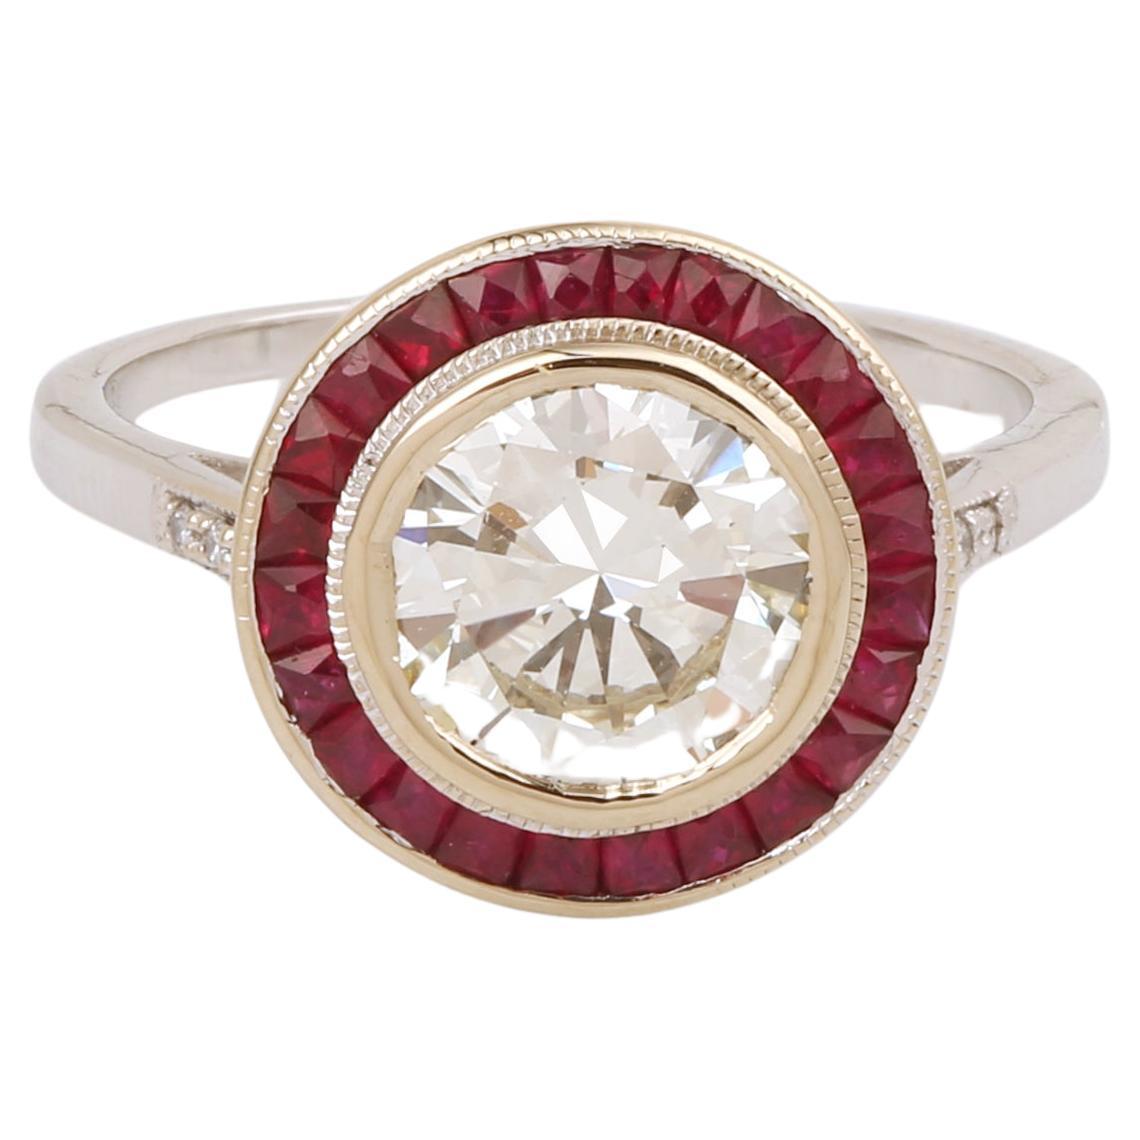 Certified 1.50 Carat Diamonds Rubies 18 Carat White Gold Art Deco Style Ring For Sale